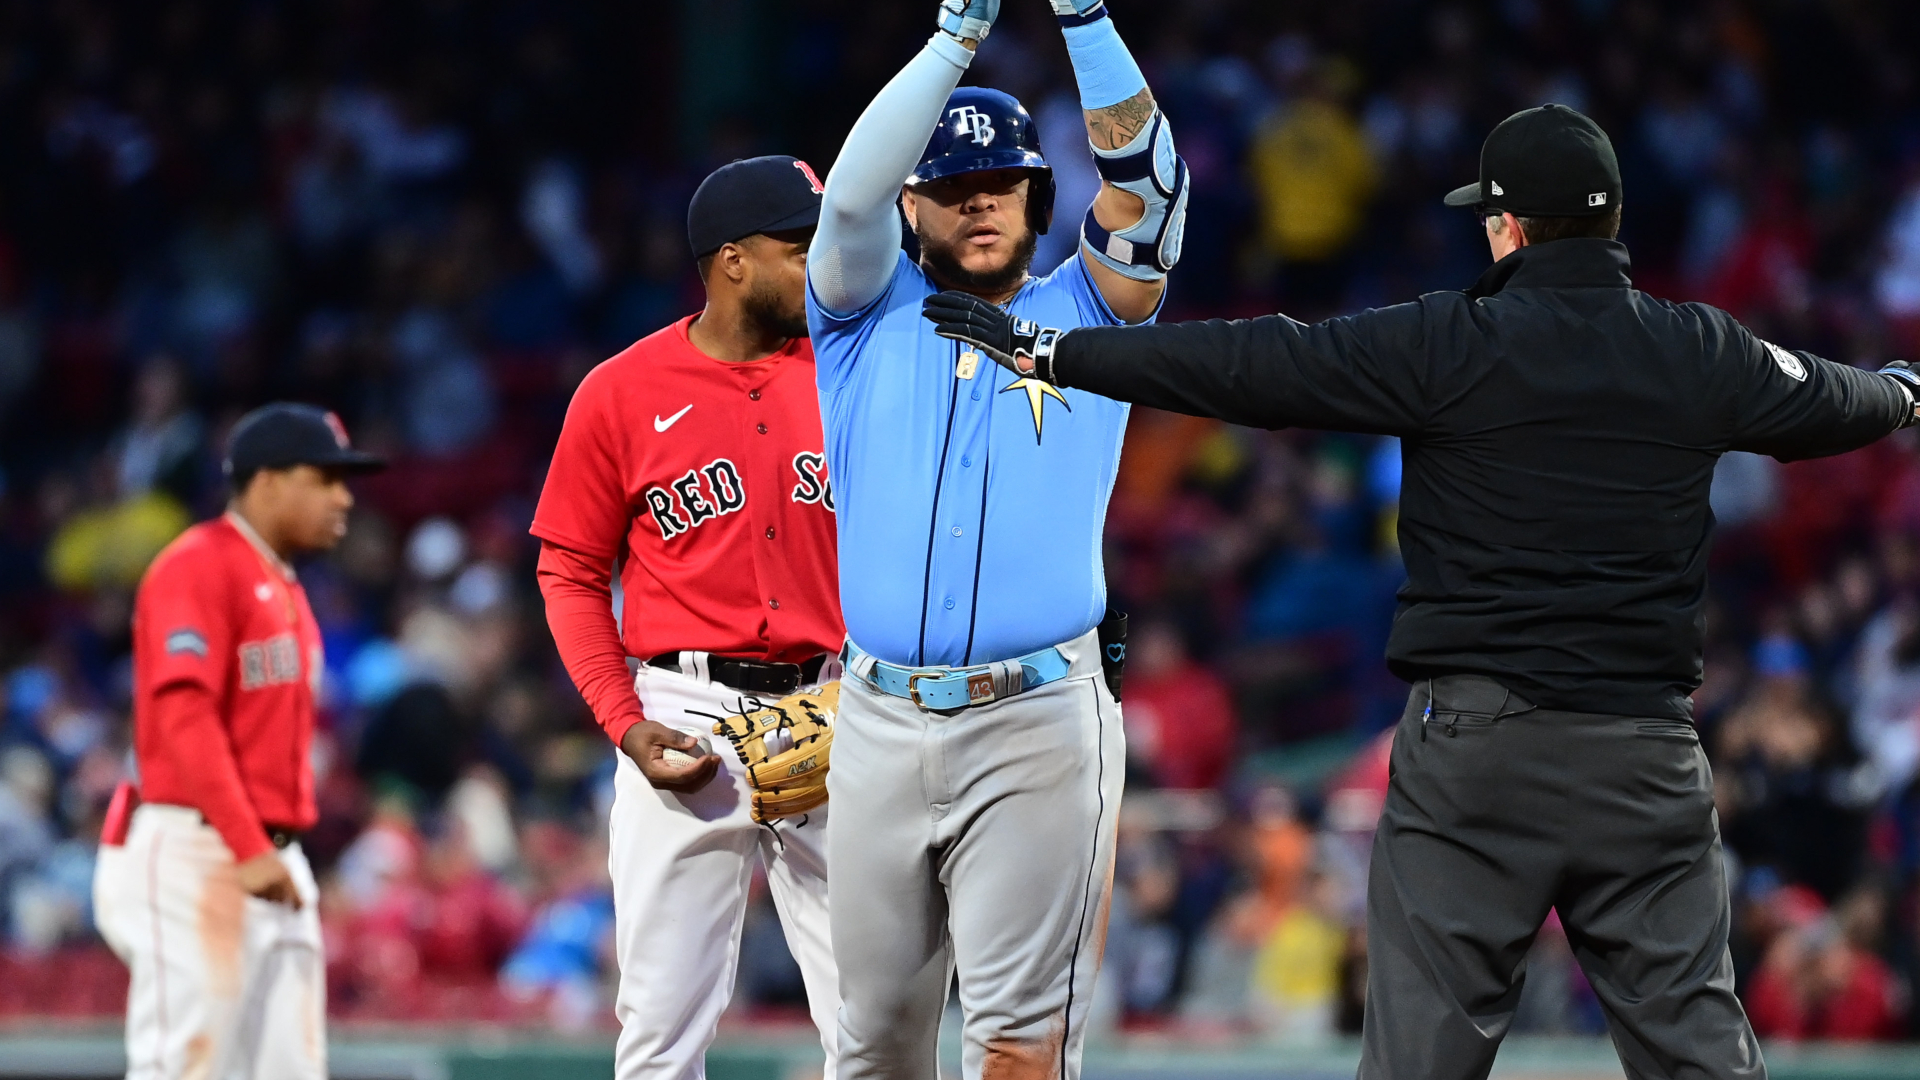 Red Sox Wrap: Rays Avoid Doubleheader Sweep With Late Rally